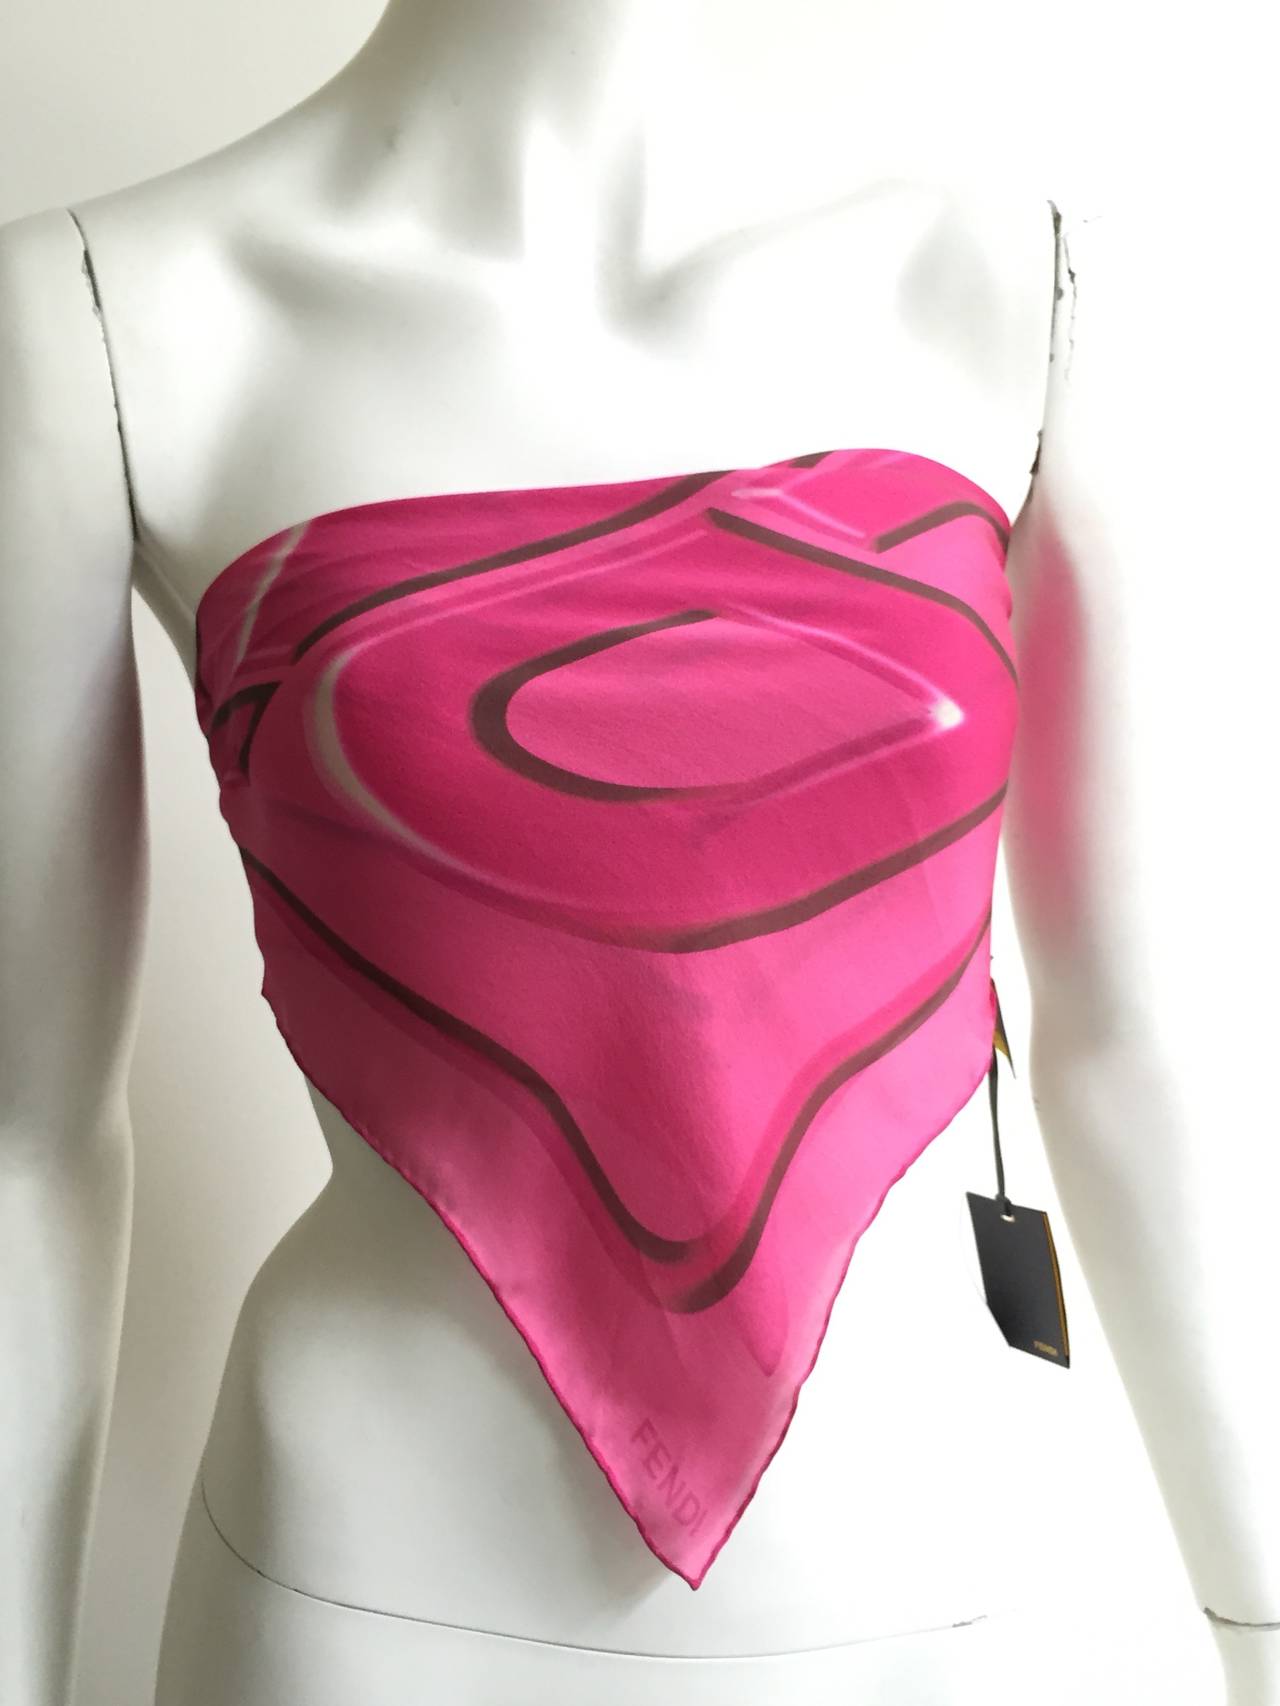 Fendi pink silk scarf still with original tags. Fun & modern print perfect for any occasion. This scarf never worn does have a water spot on it but other than that it's in perfect condition.  
22